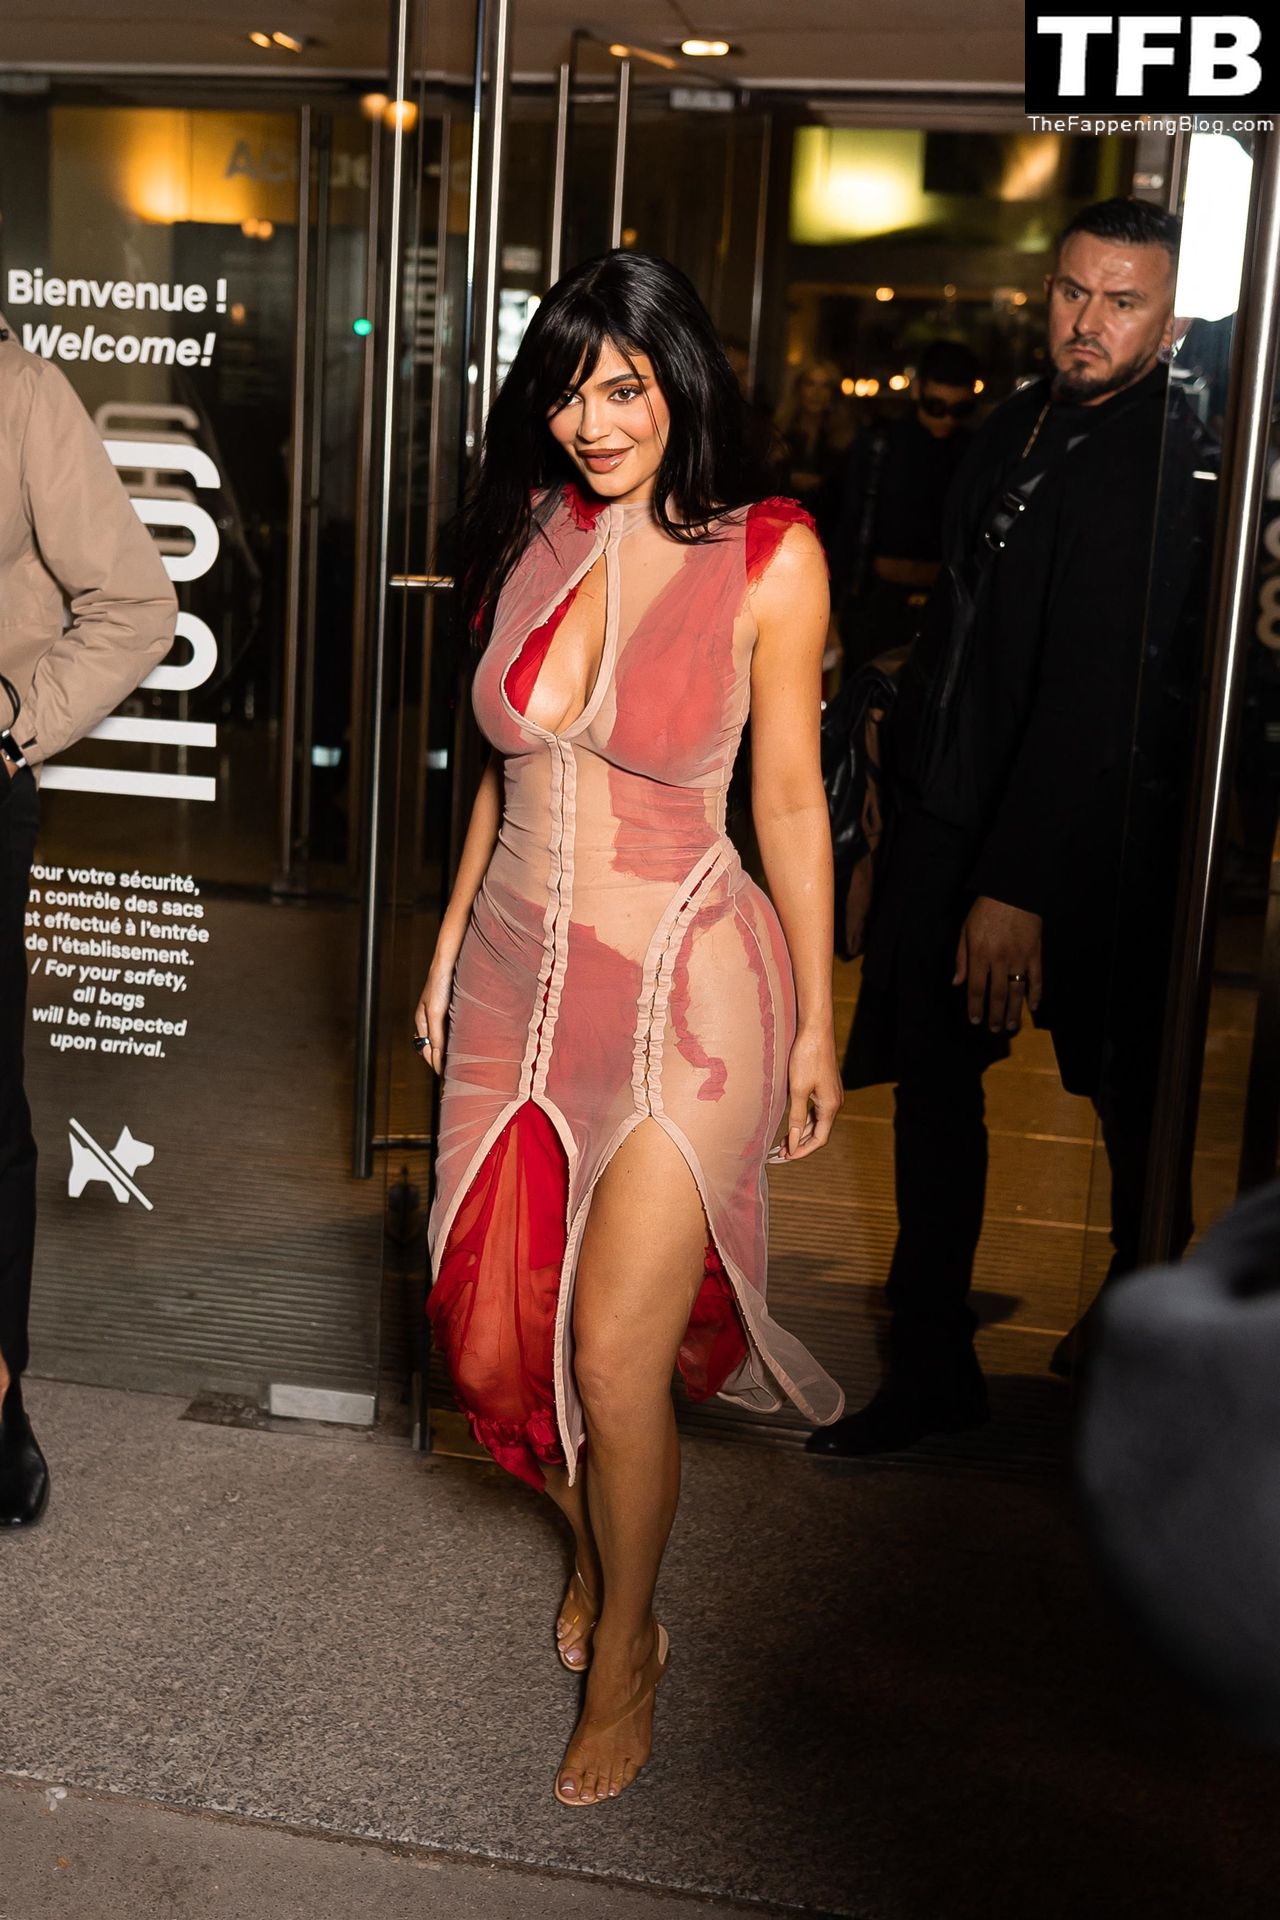 Kylie Jenner is Ravishing in Red Leaving Dinner at “Chez Loulou” During PFW (19 Photos)